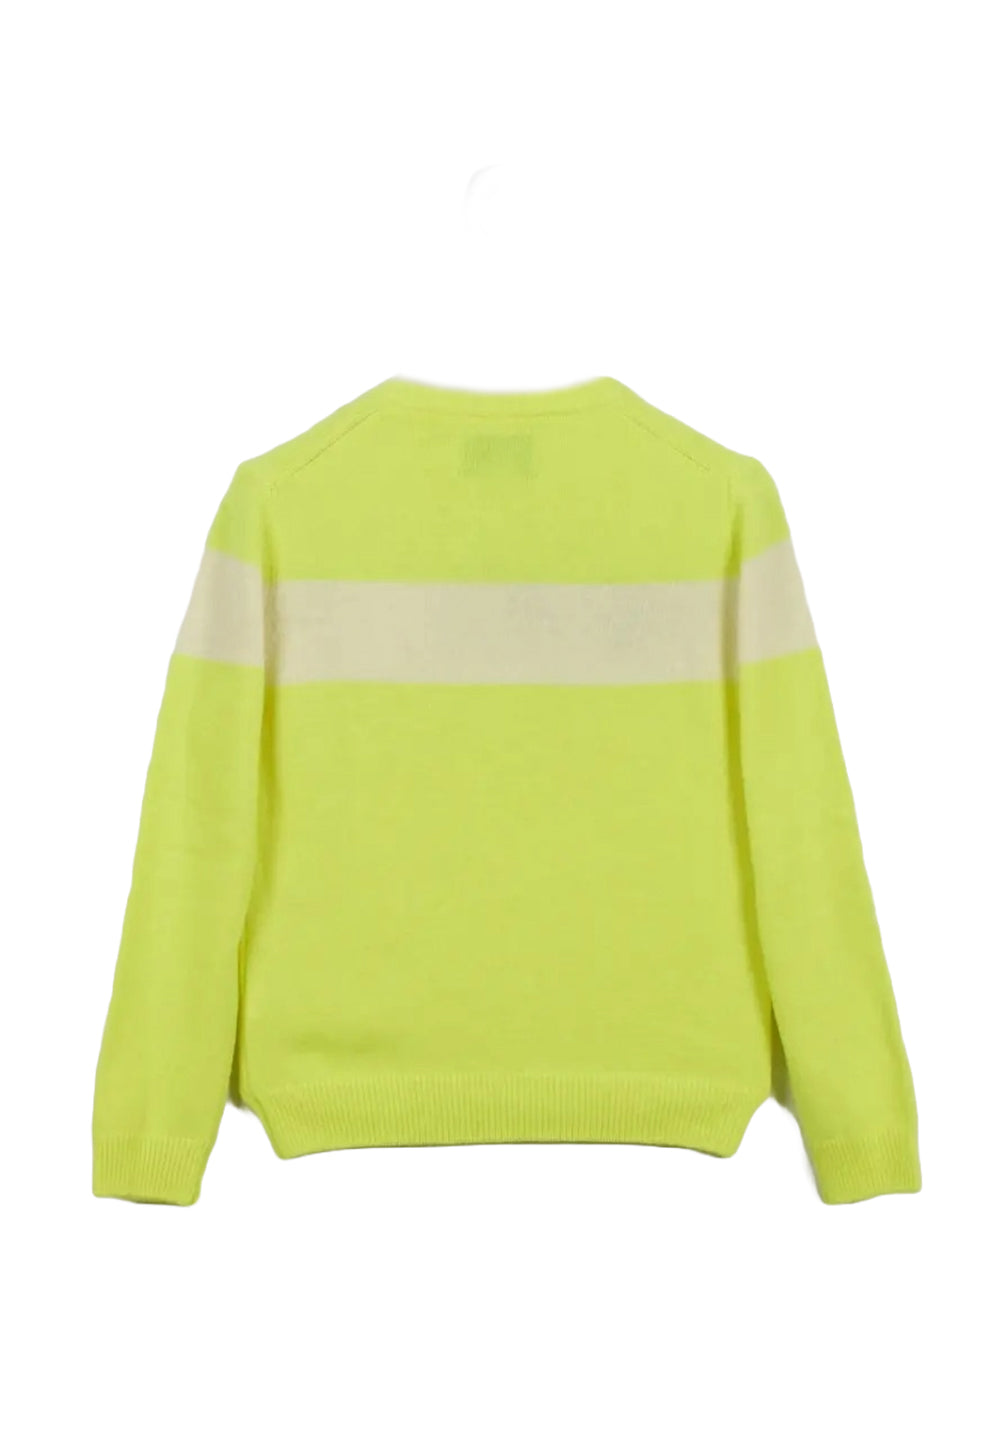 Fluorescent yellow sweater for boys